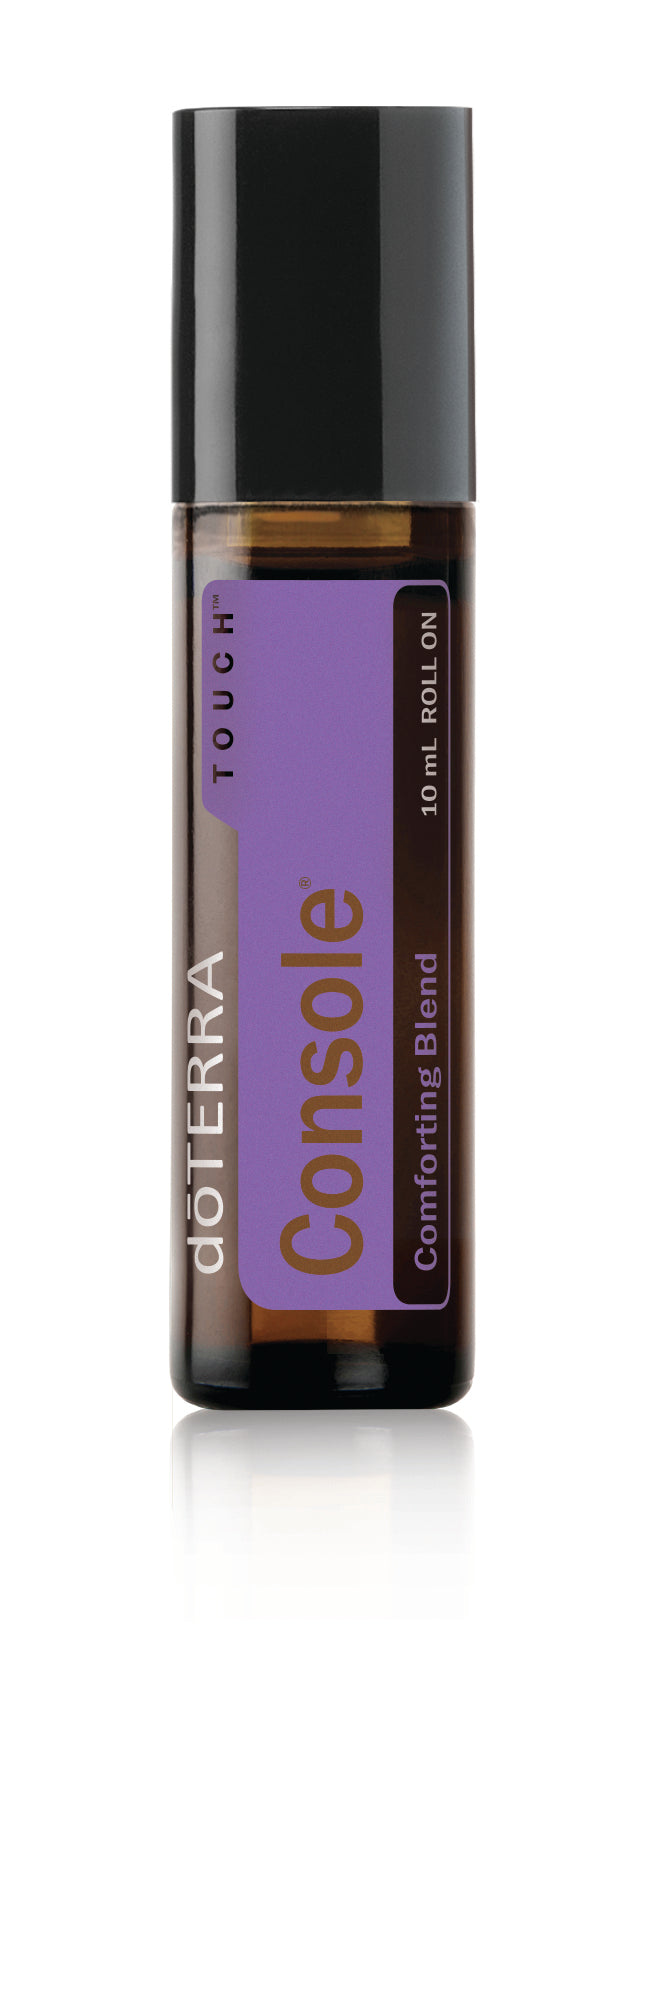 doTERRA Console Touch 10ml